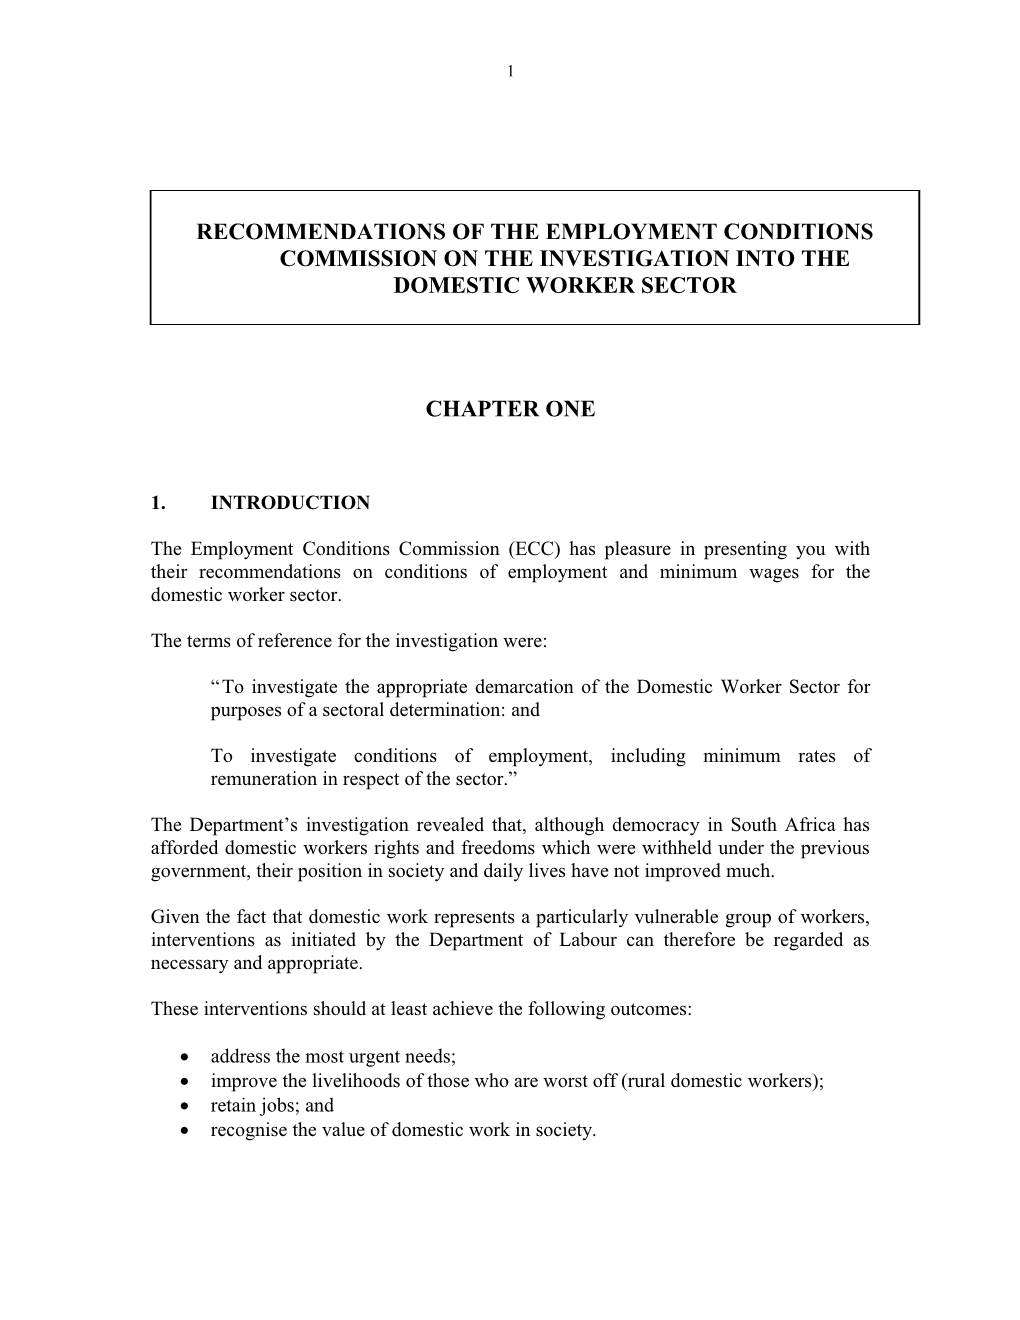 Recommendations of the Employment Conditions Commission on the Investigation Into the Domestic